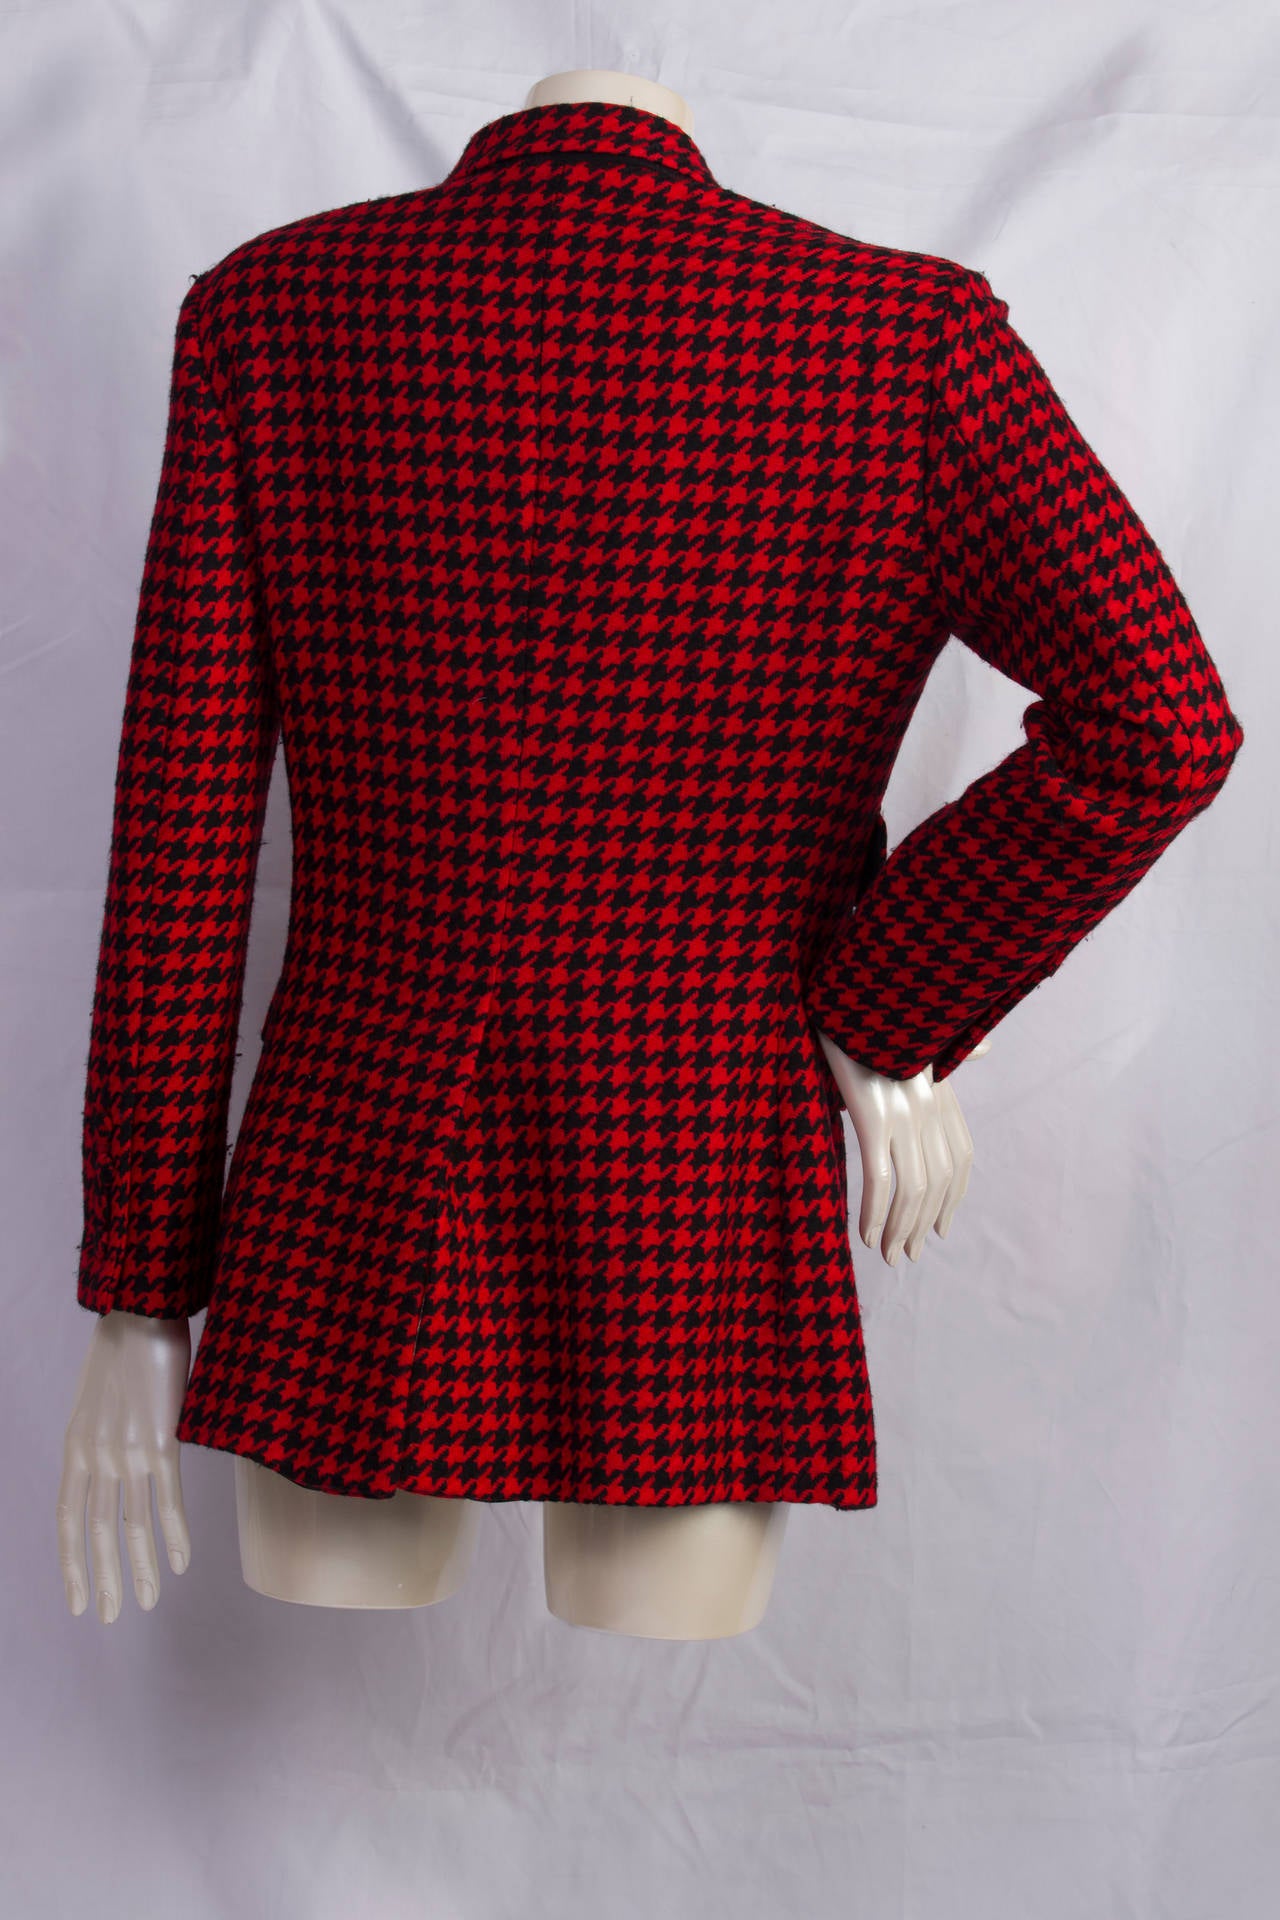 Black 1980s Moschino Couture Pied de Poule red and black jacket For Sale